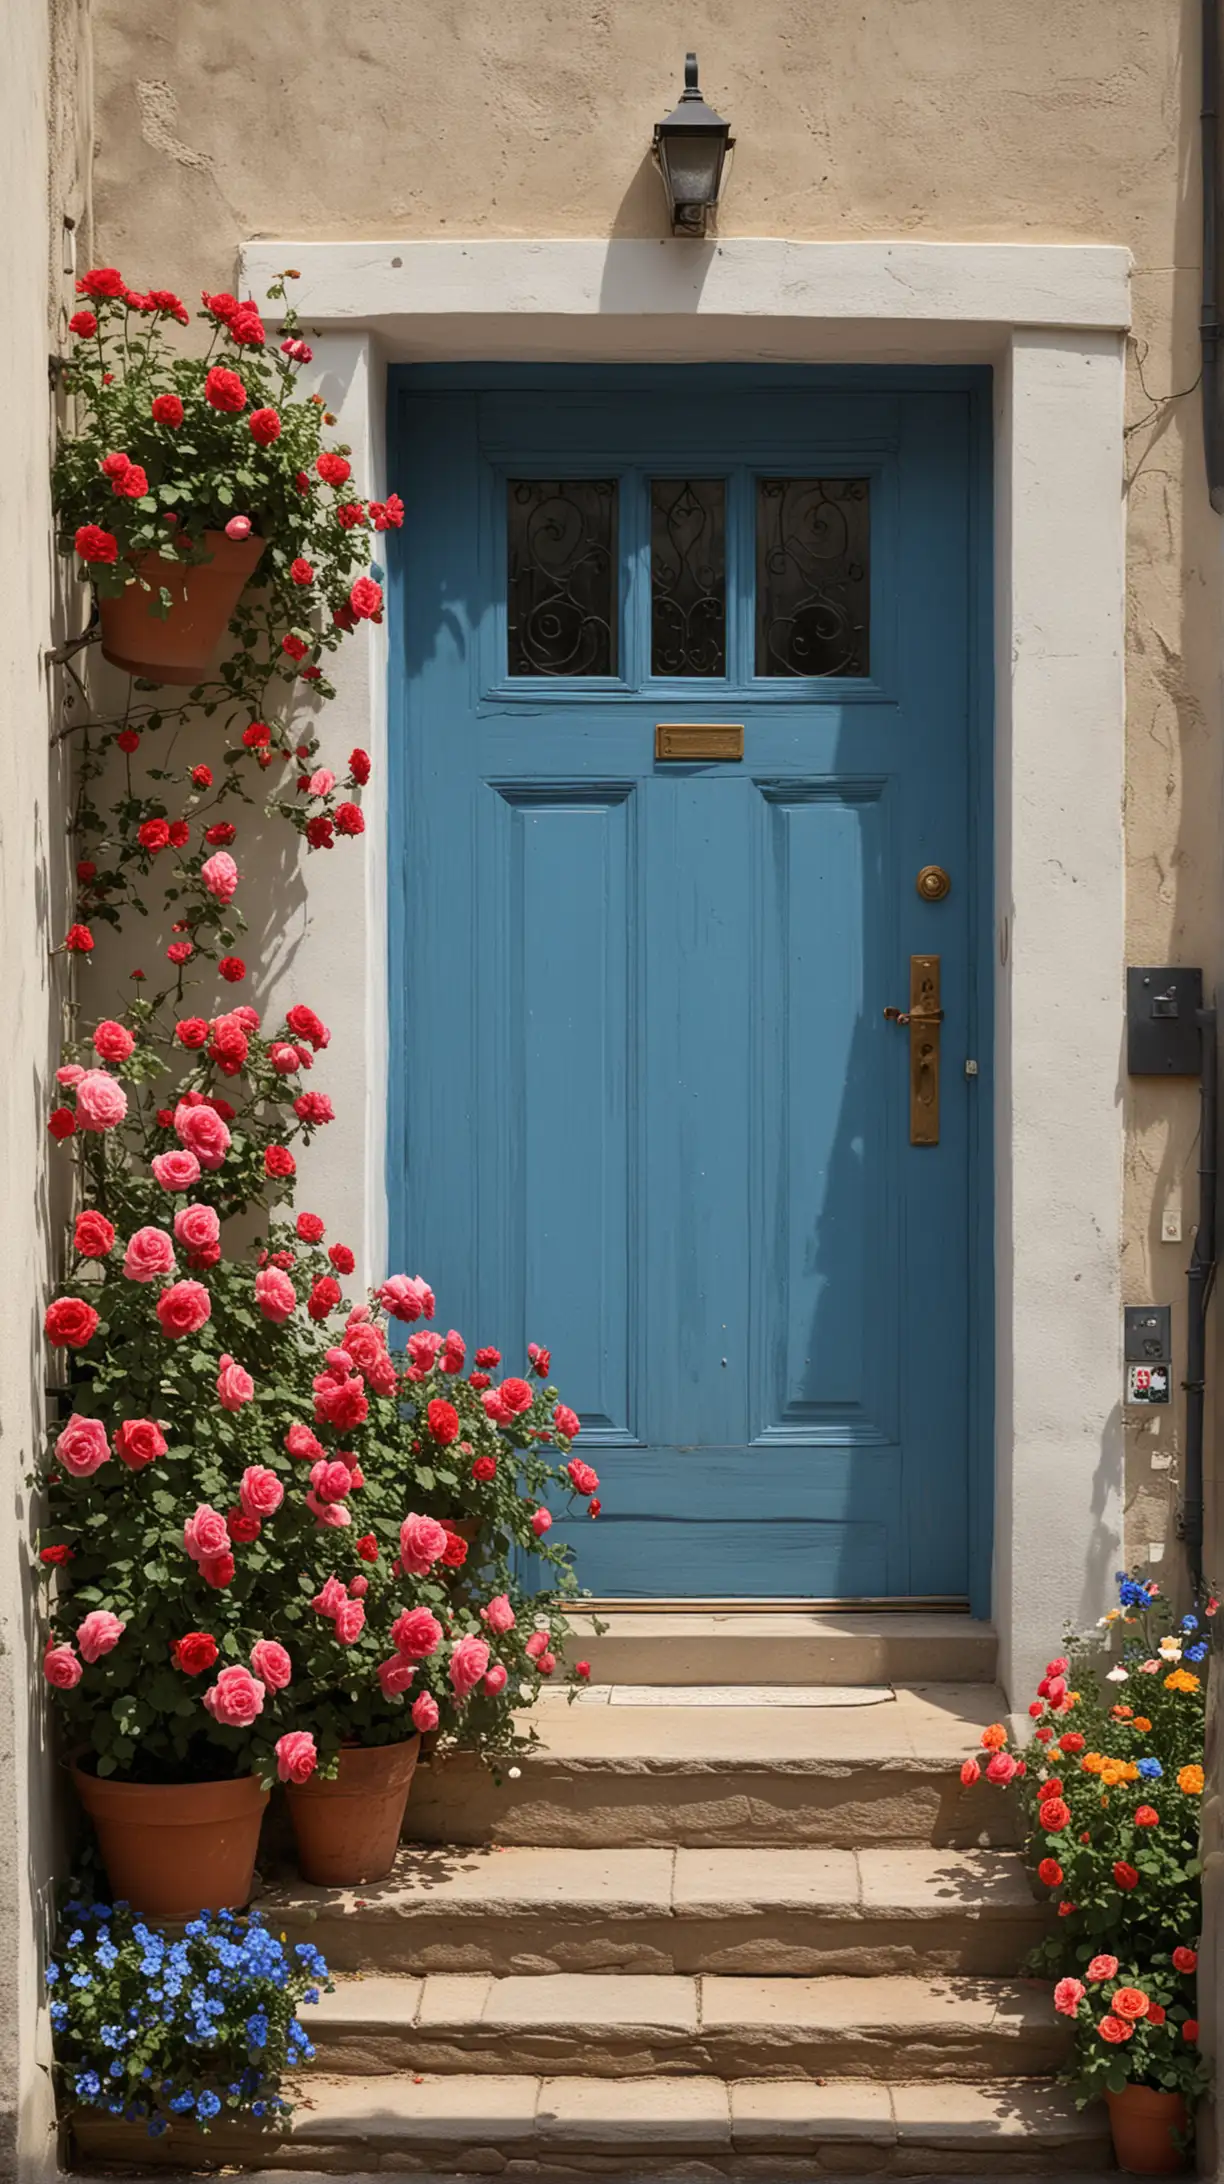 generate picture about a house door, the doors is blue, there are some pot with colorful flowers around the door. some steps lead to the door. there is a bigger flowers, which goes onto the wall. the flowers on the wall are roses. the sun is coming from right
